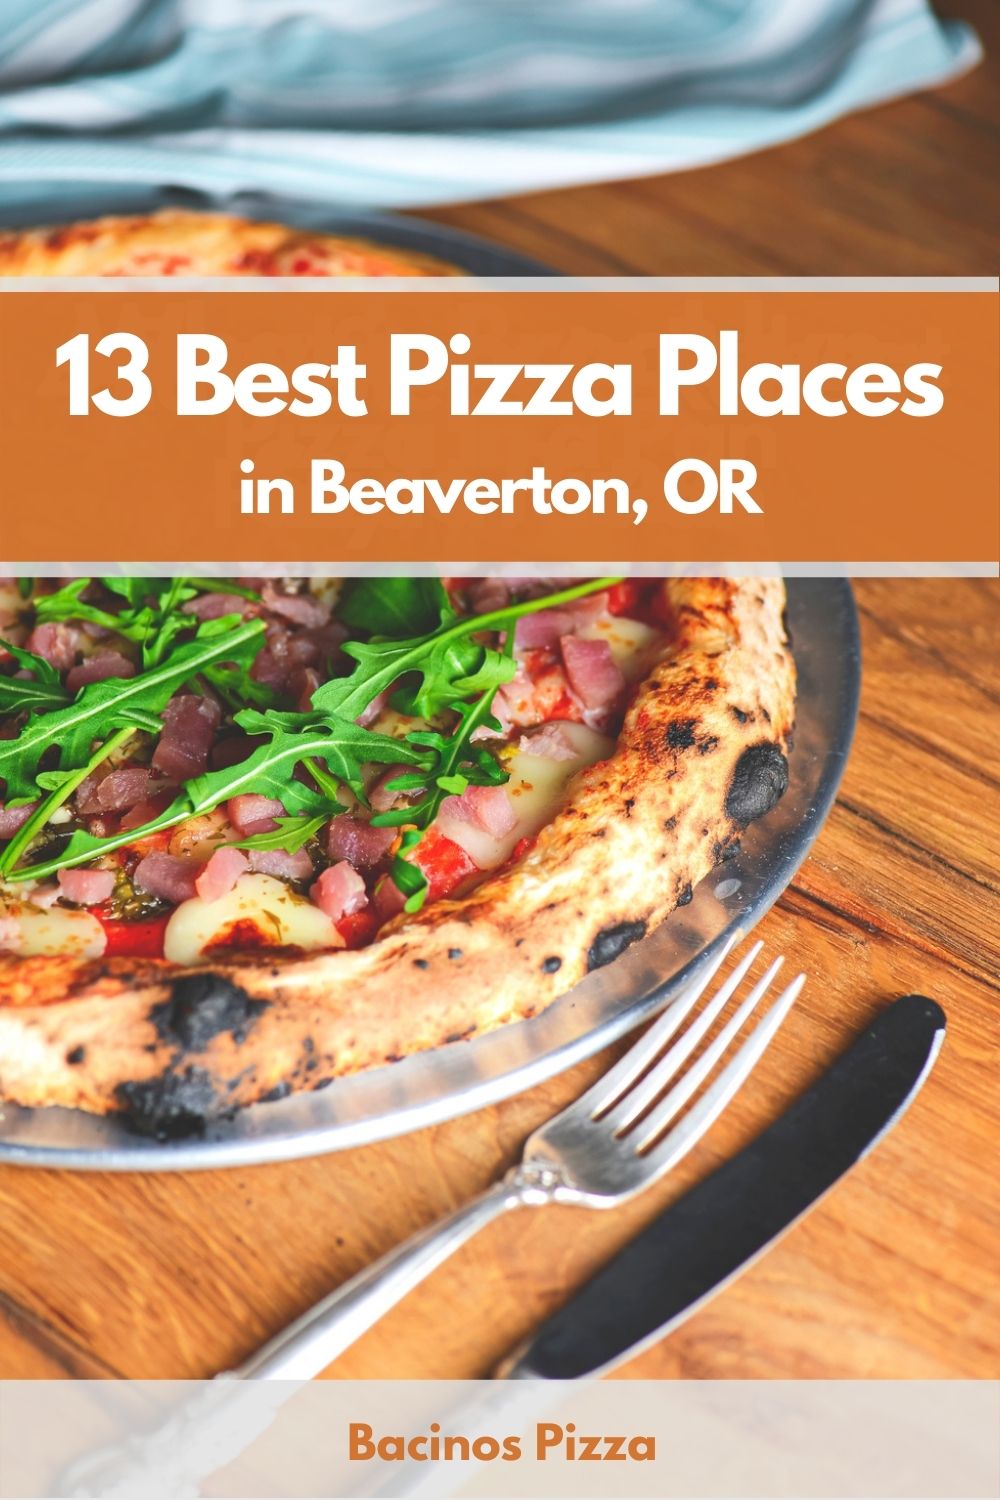 13 Best Pizza Places in Beaverton, OR pin 2